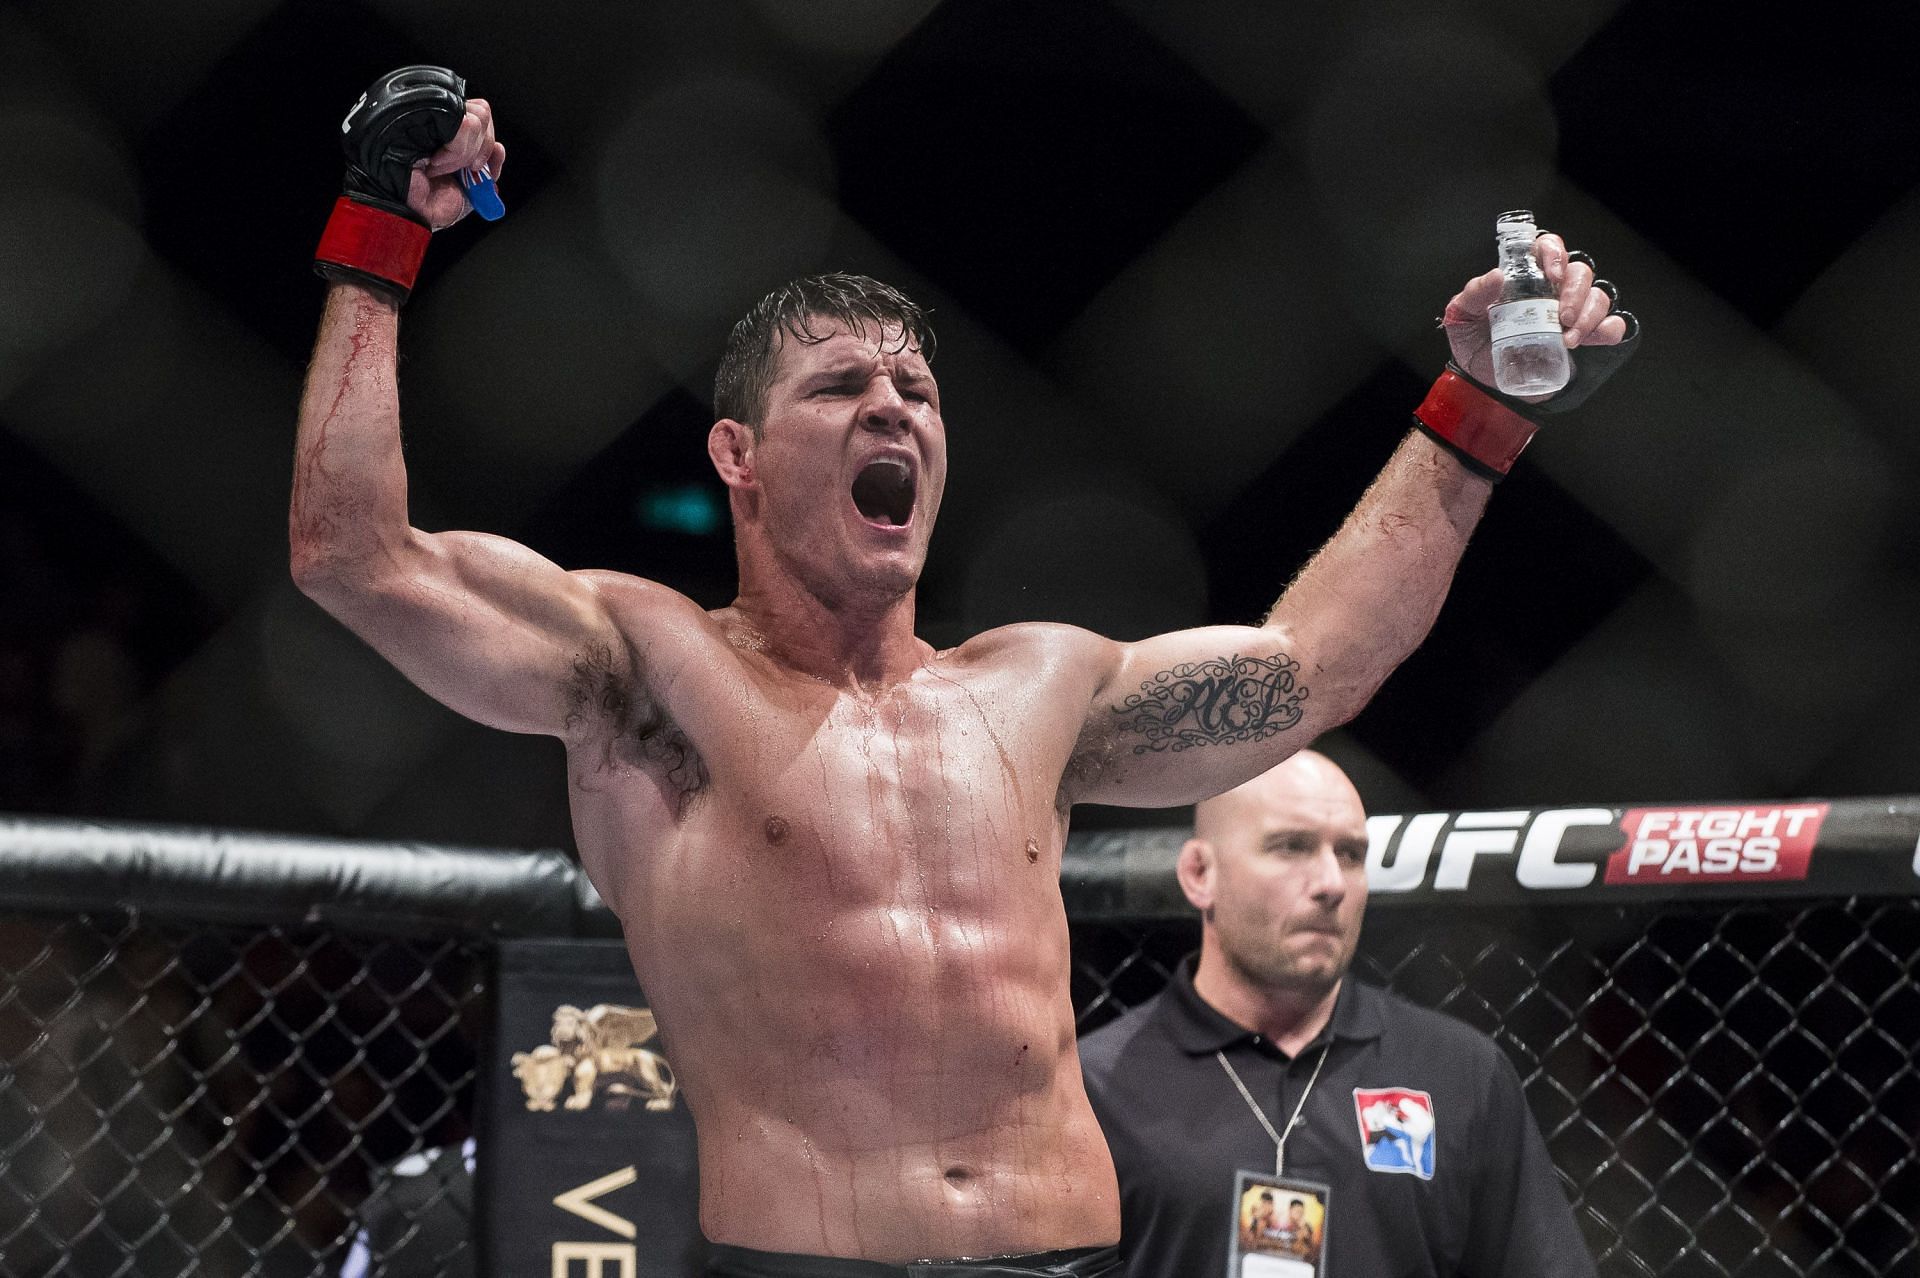 Michael Bisping shocked the world by beating Luke Rockhold in 2016